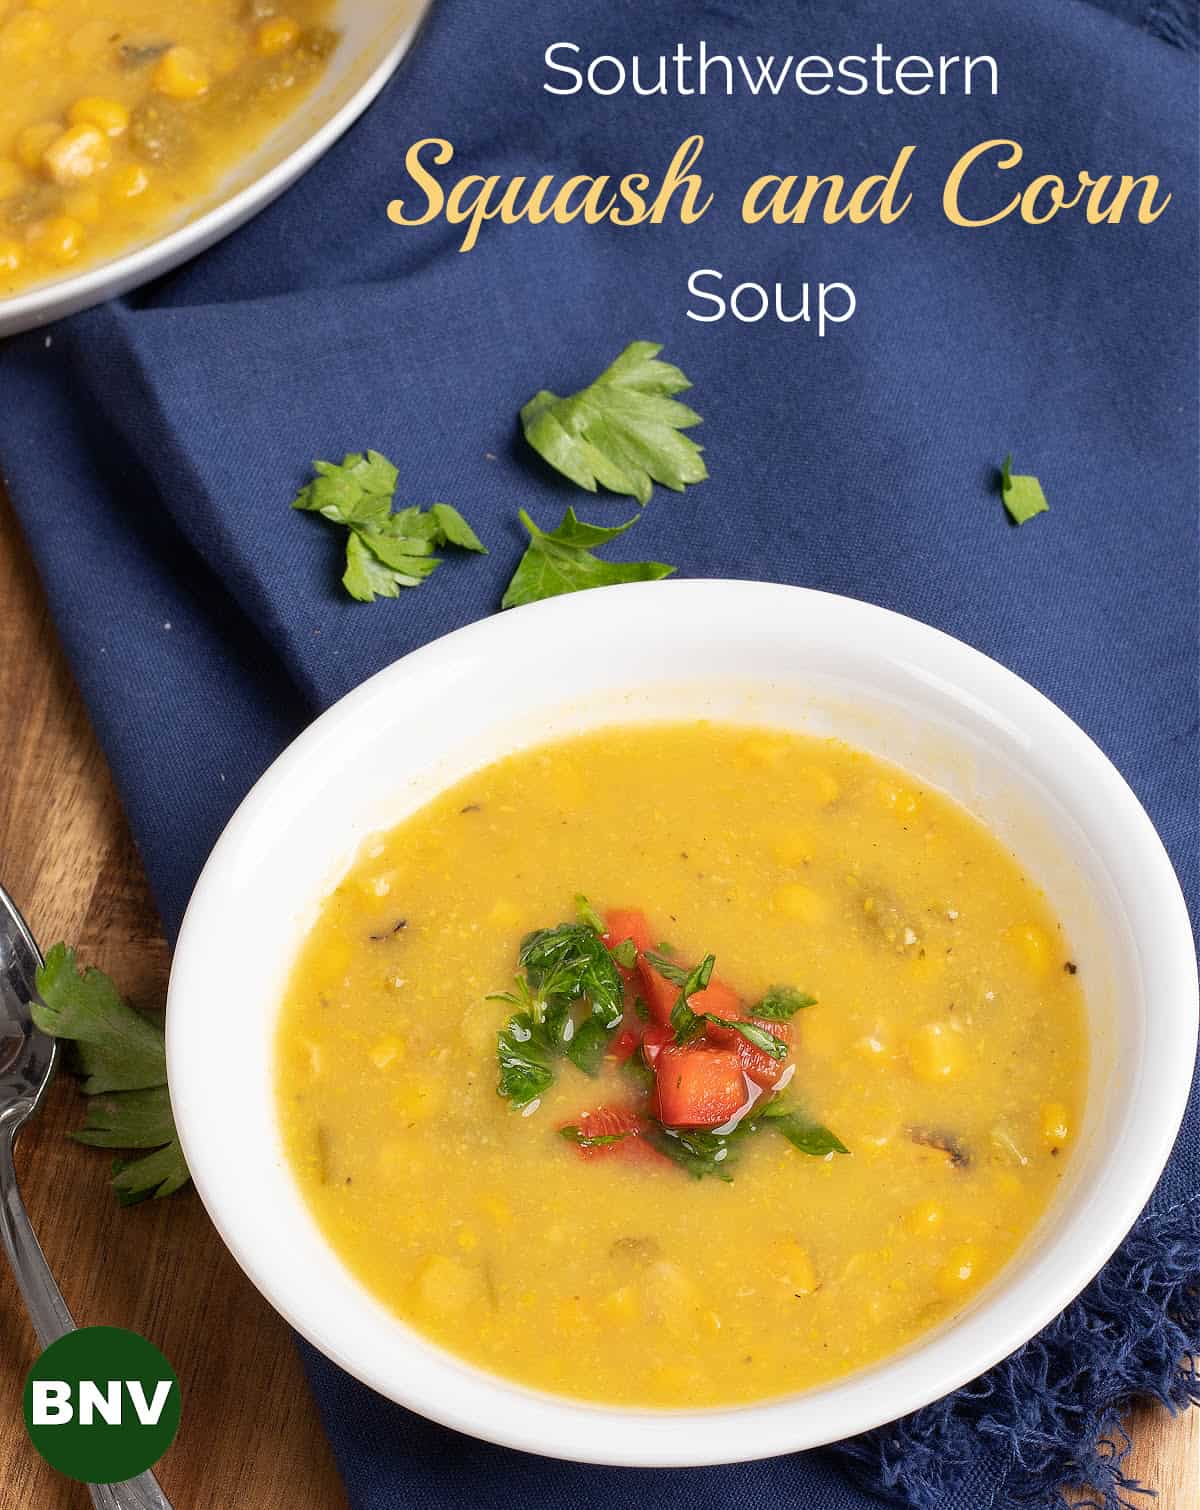 Bowl of southwestern squash and corn soup with a ramekin of red pepper relish
